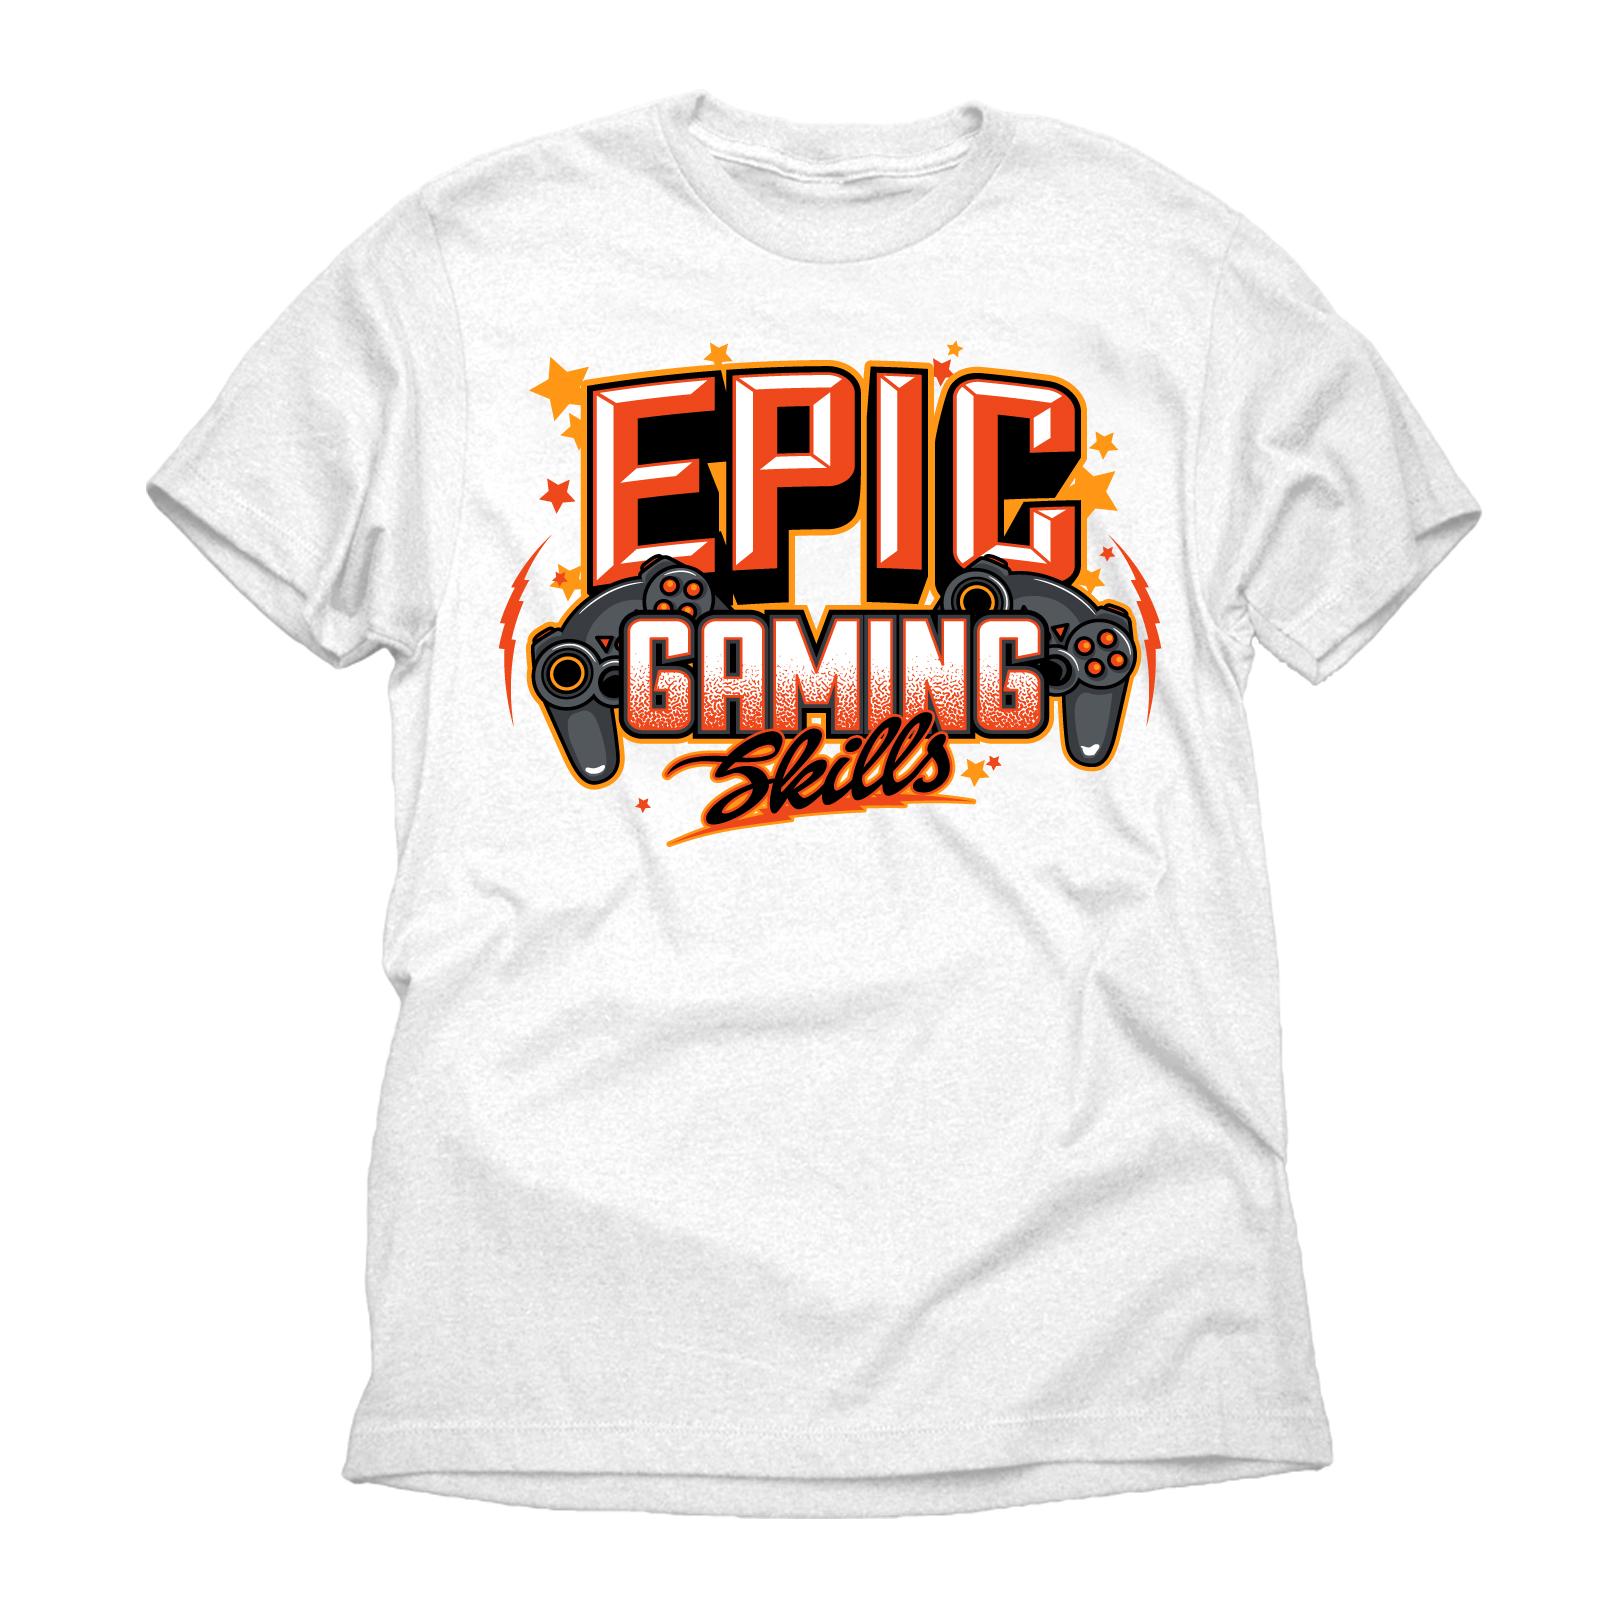 Dynasty Boy's Graphic T-Shirt - Epic Gaming